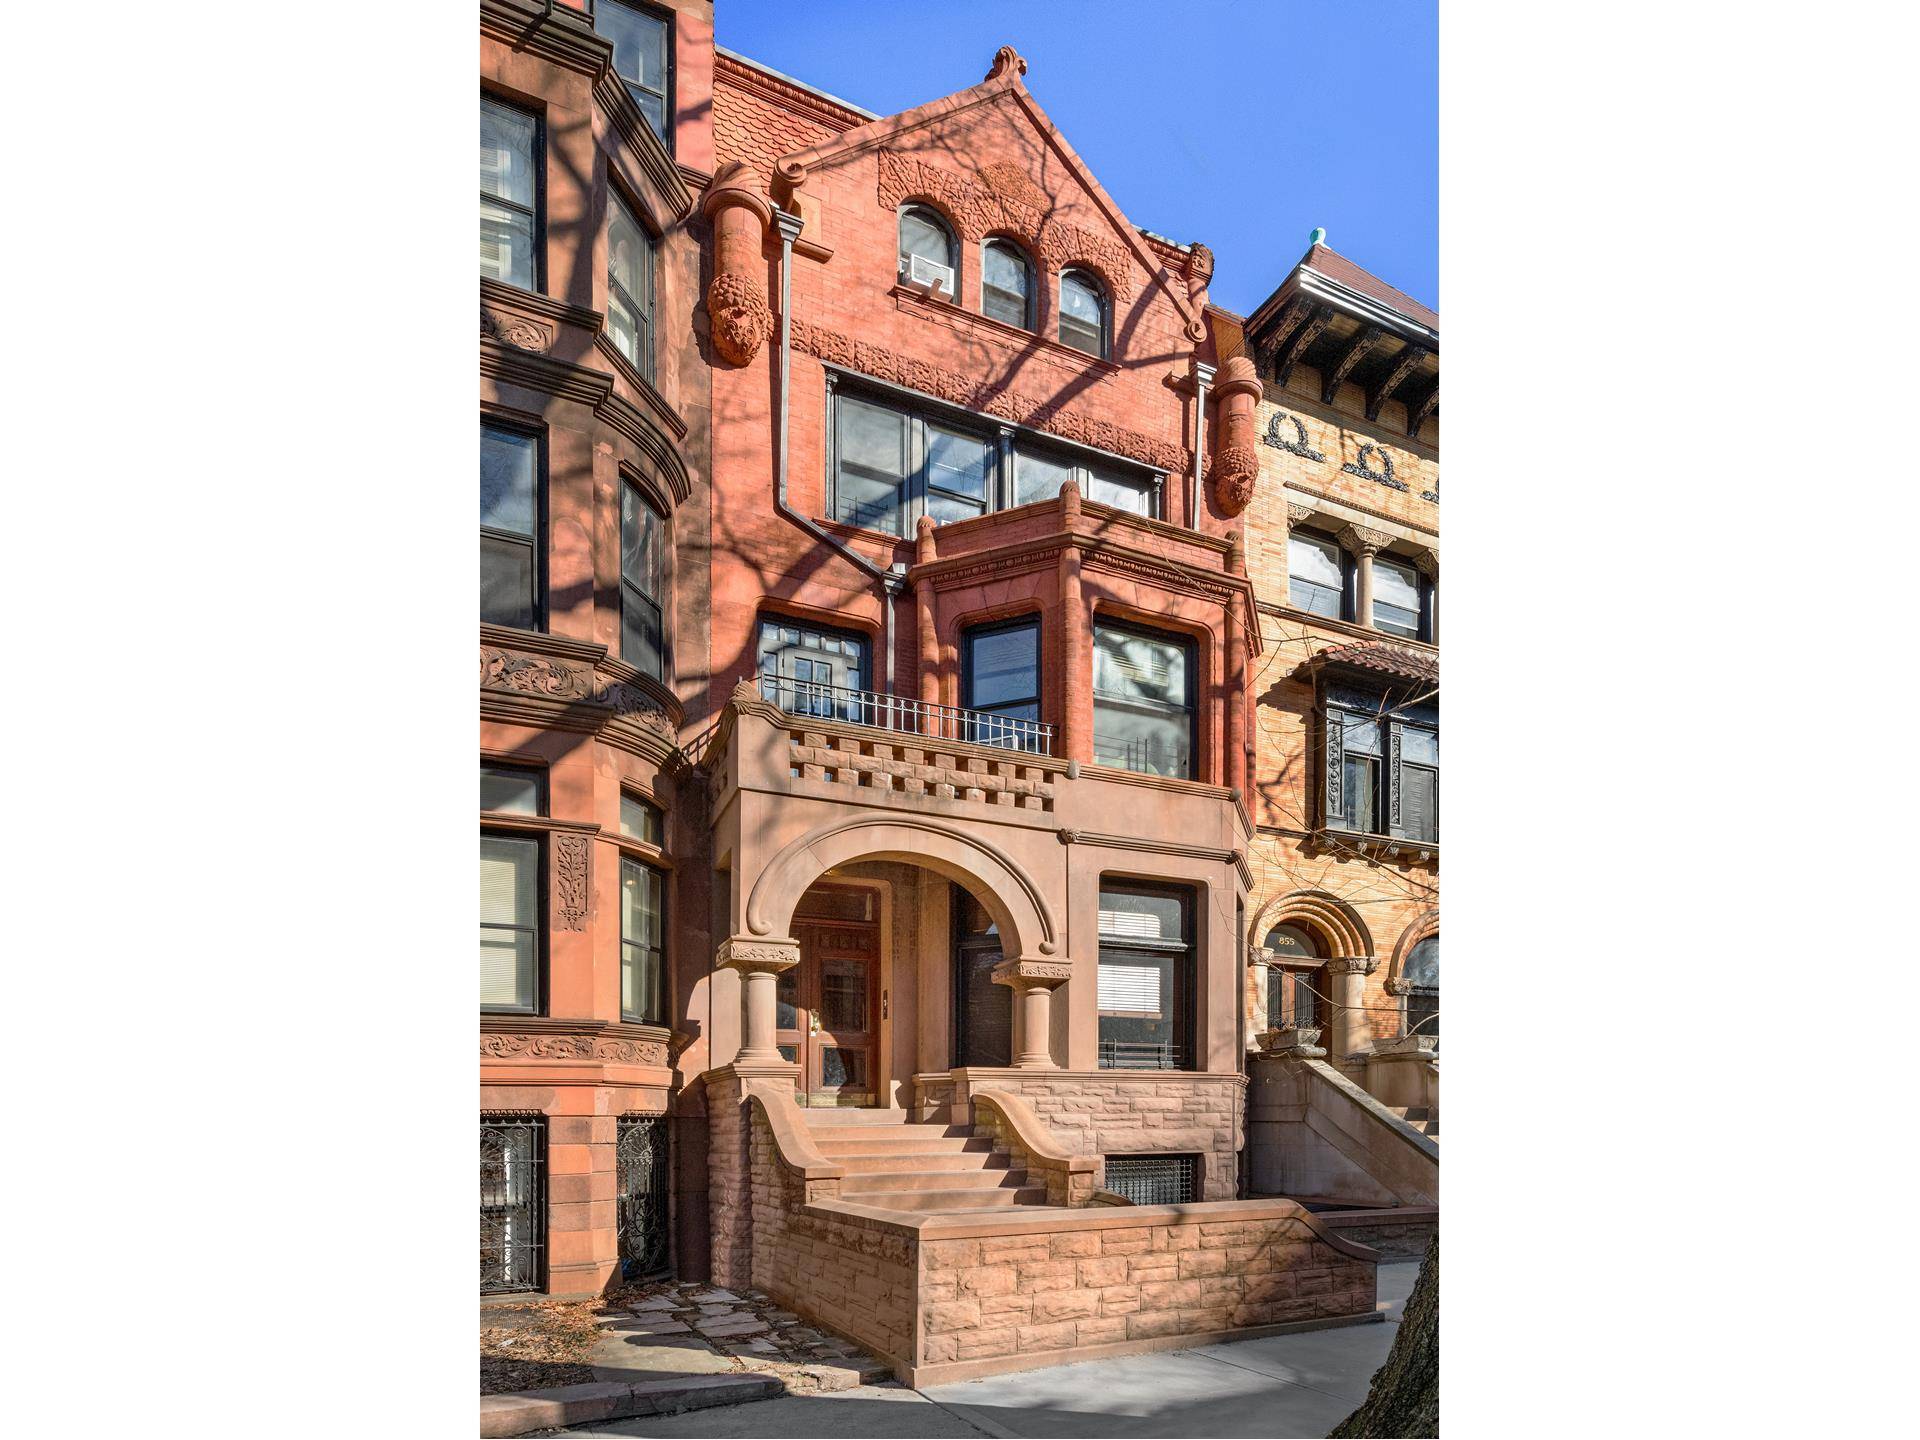 853 Carroll Street is a massive, approximately 6, 000 square foot Romanesque Revival mansion on one of the single most desirable blocks in Park Slope.